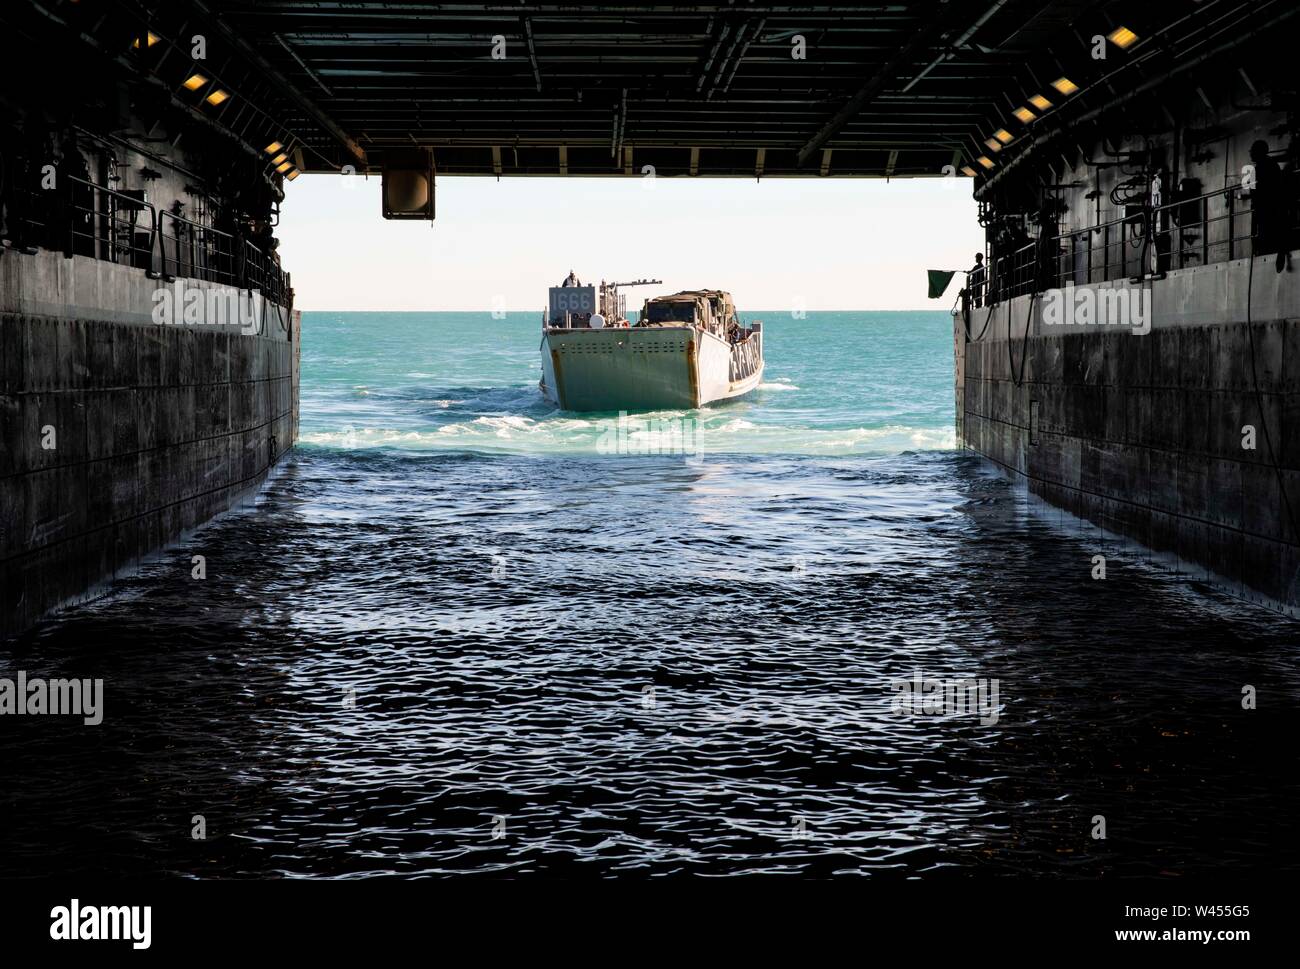 190719-N-DX072-1025 STANAGE BAY, Australia (July 19, 2019) Landing Craft, Utility (LCU) 1666 departs the well deck of the amphibious transport dock ship USS Green Bay (LPD 20). Green Bay, part of the Wasp Expeditionary Strike Group, with embarked 31st Marine Expeditionary Unit, is currently participating in Talisman Sabre 2019 off the coast of Northern Australia. A bilateral, biennial event, Talisman Sabre is designed to improve U.S. and Australian combat training, readiness and interoperability through realistic, relevant training necessary to maintain regional security, peace and stability. Stock Photo